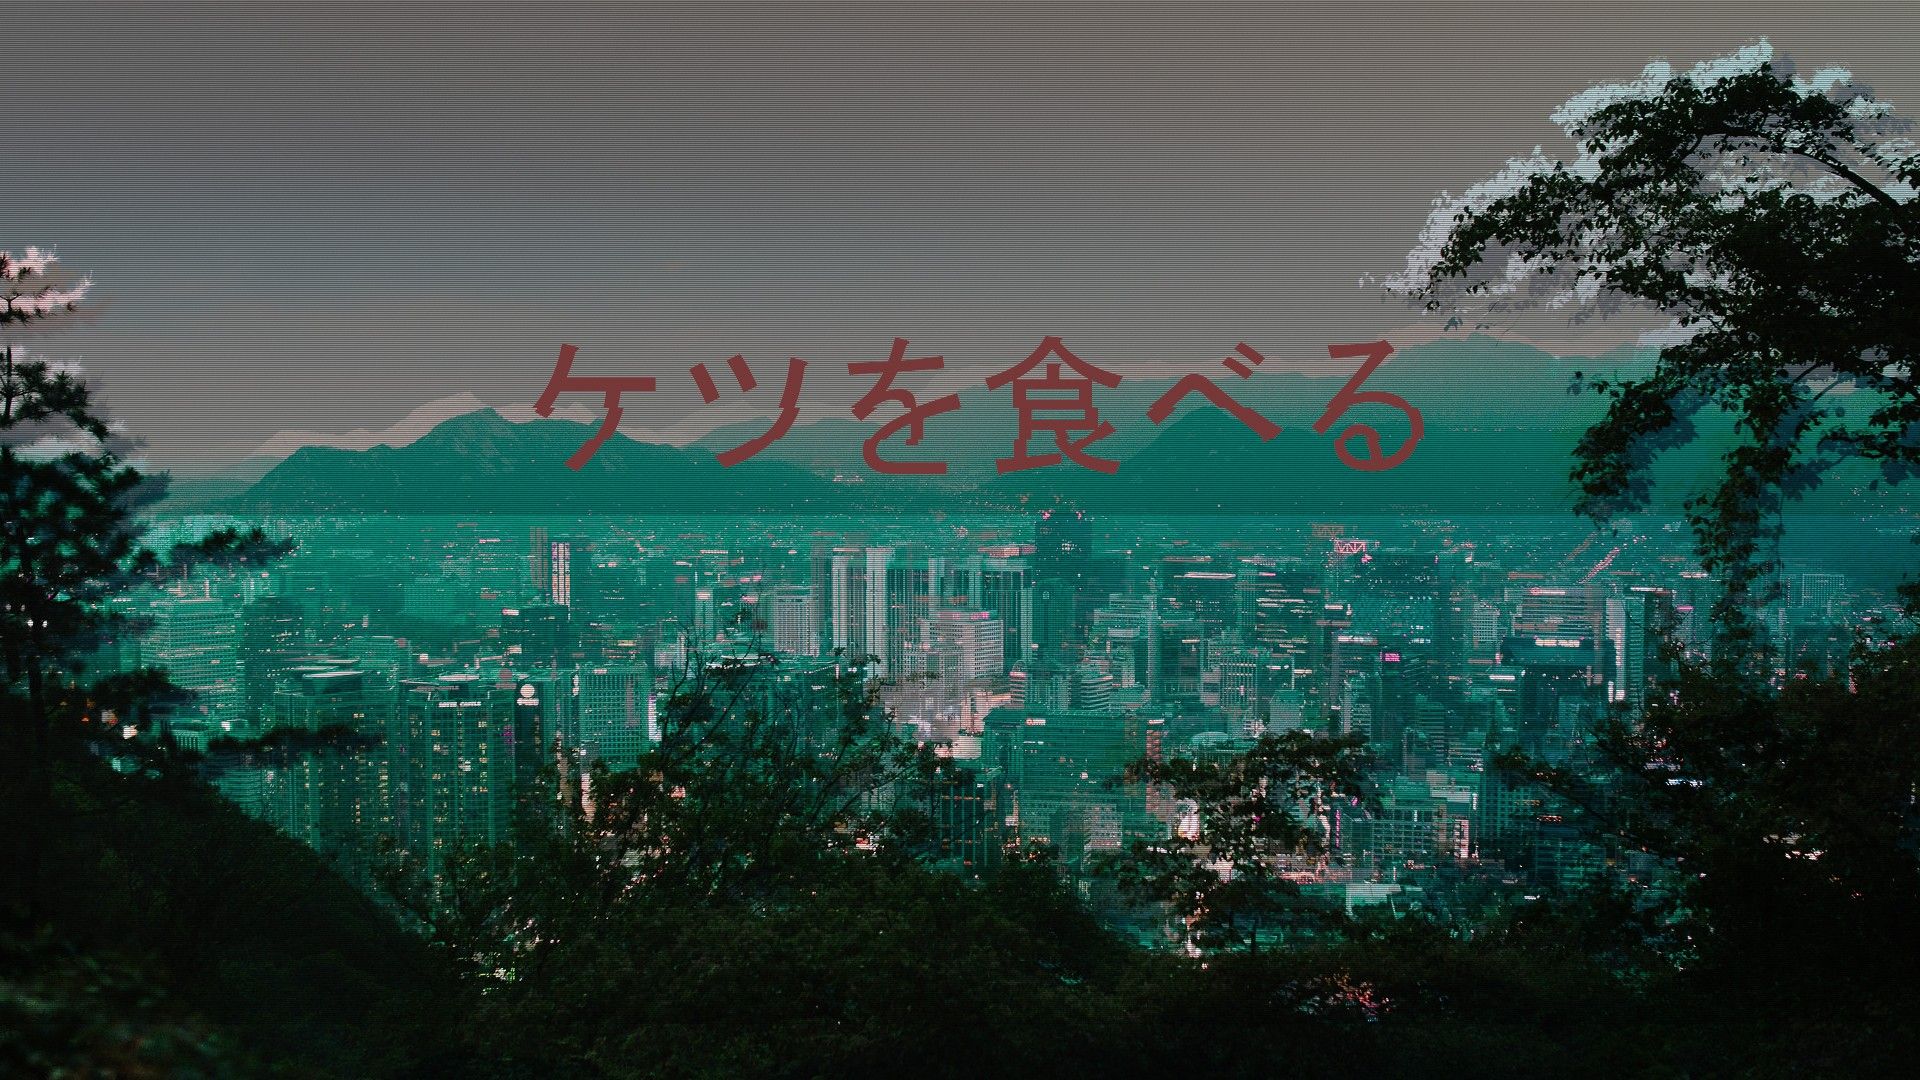 Aesthetic background of a city at night with the text 